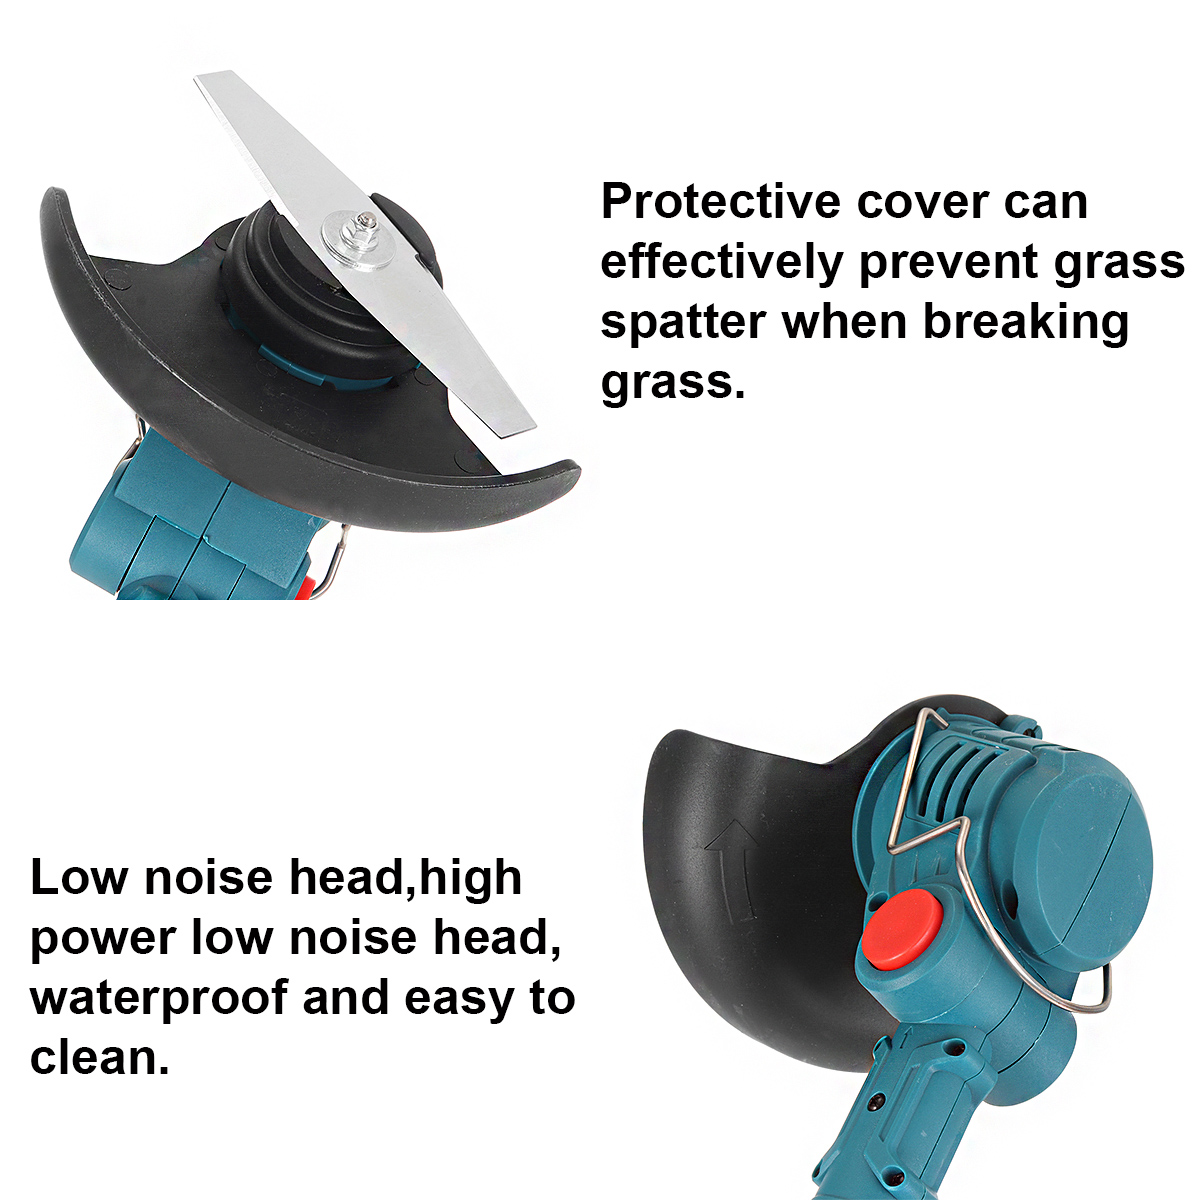 21V 4000mAh Cordless Electric Grass Trimmer Lawn Mower Lithium-Ion Cordless Weed Cutter Kit Garden Tools W/ 2 Batteries